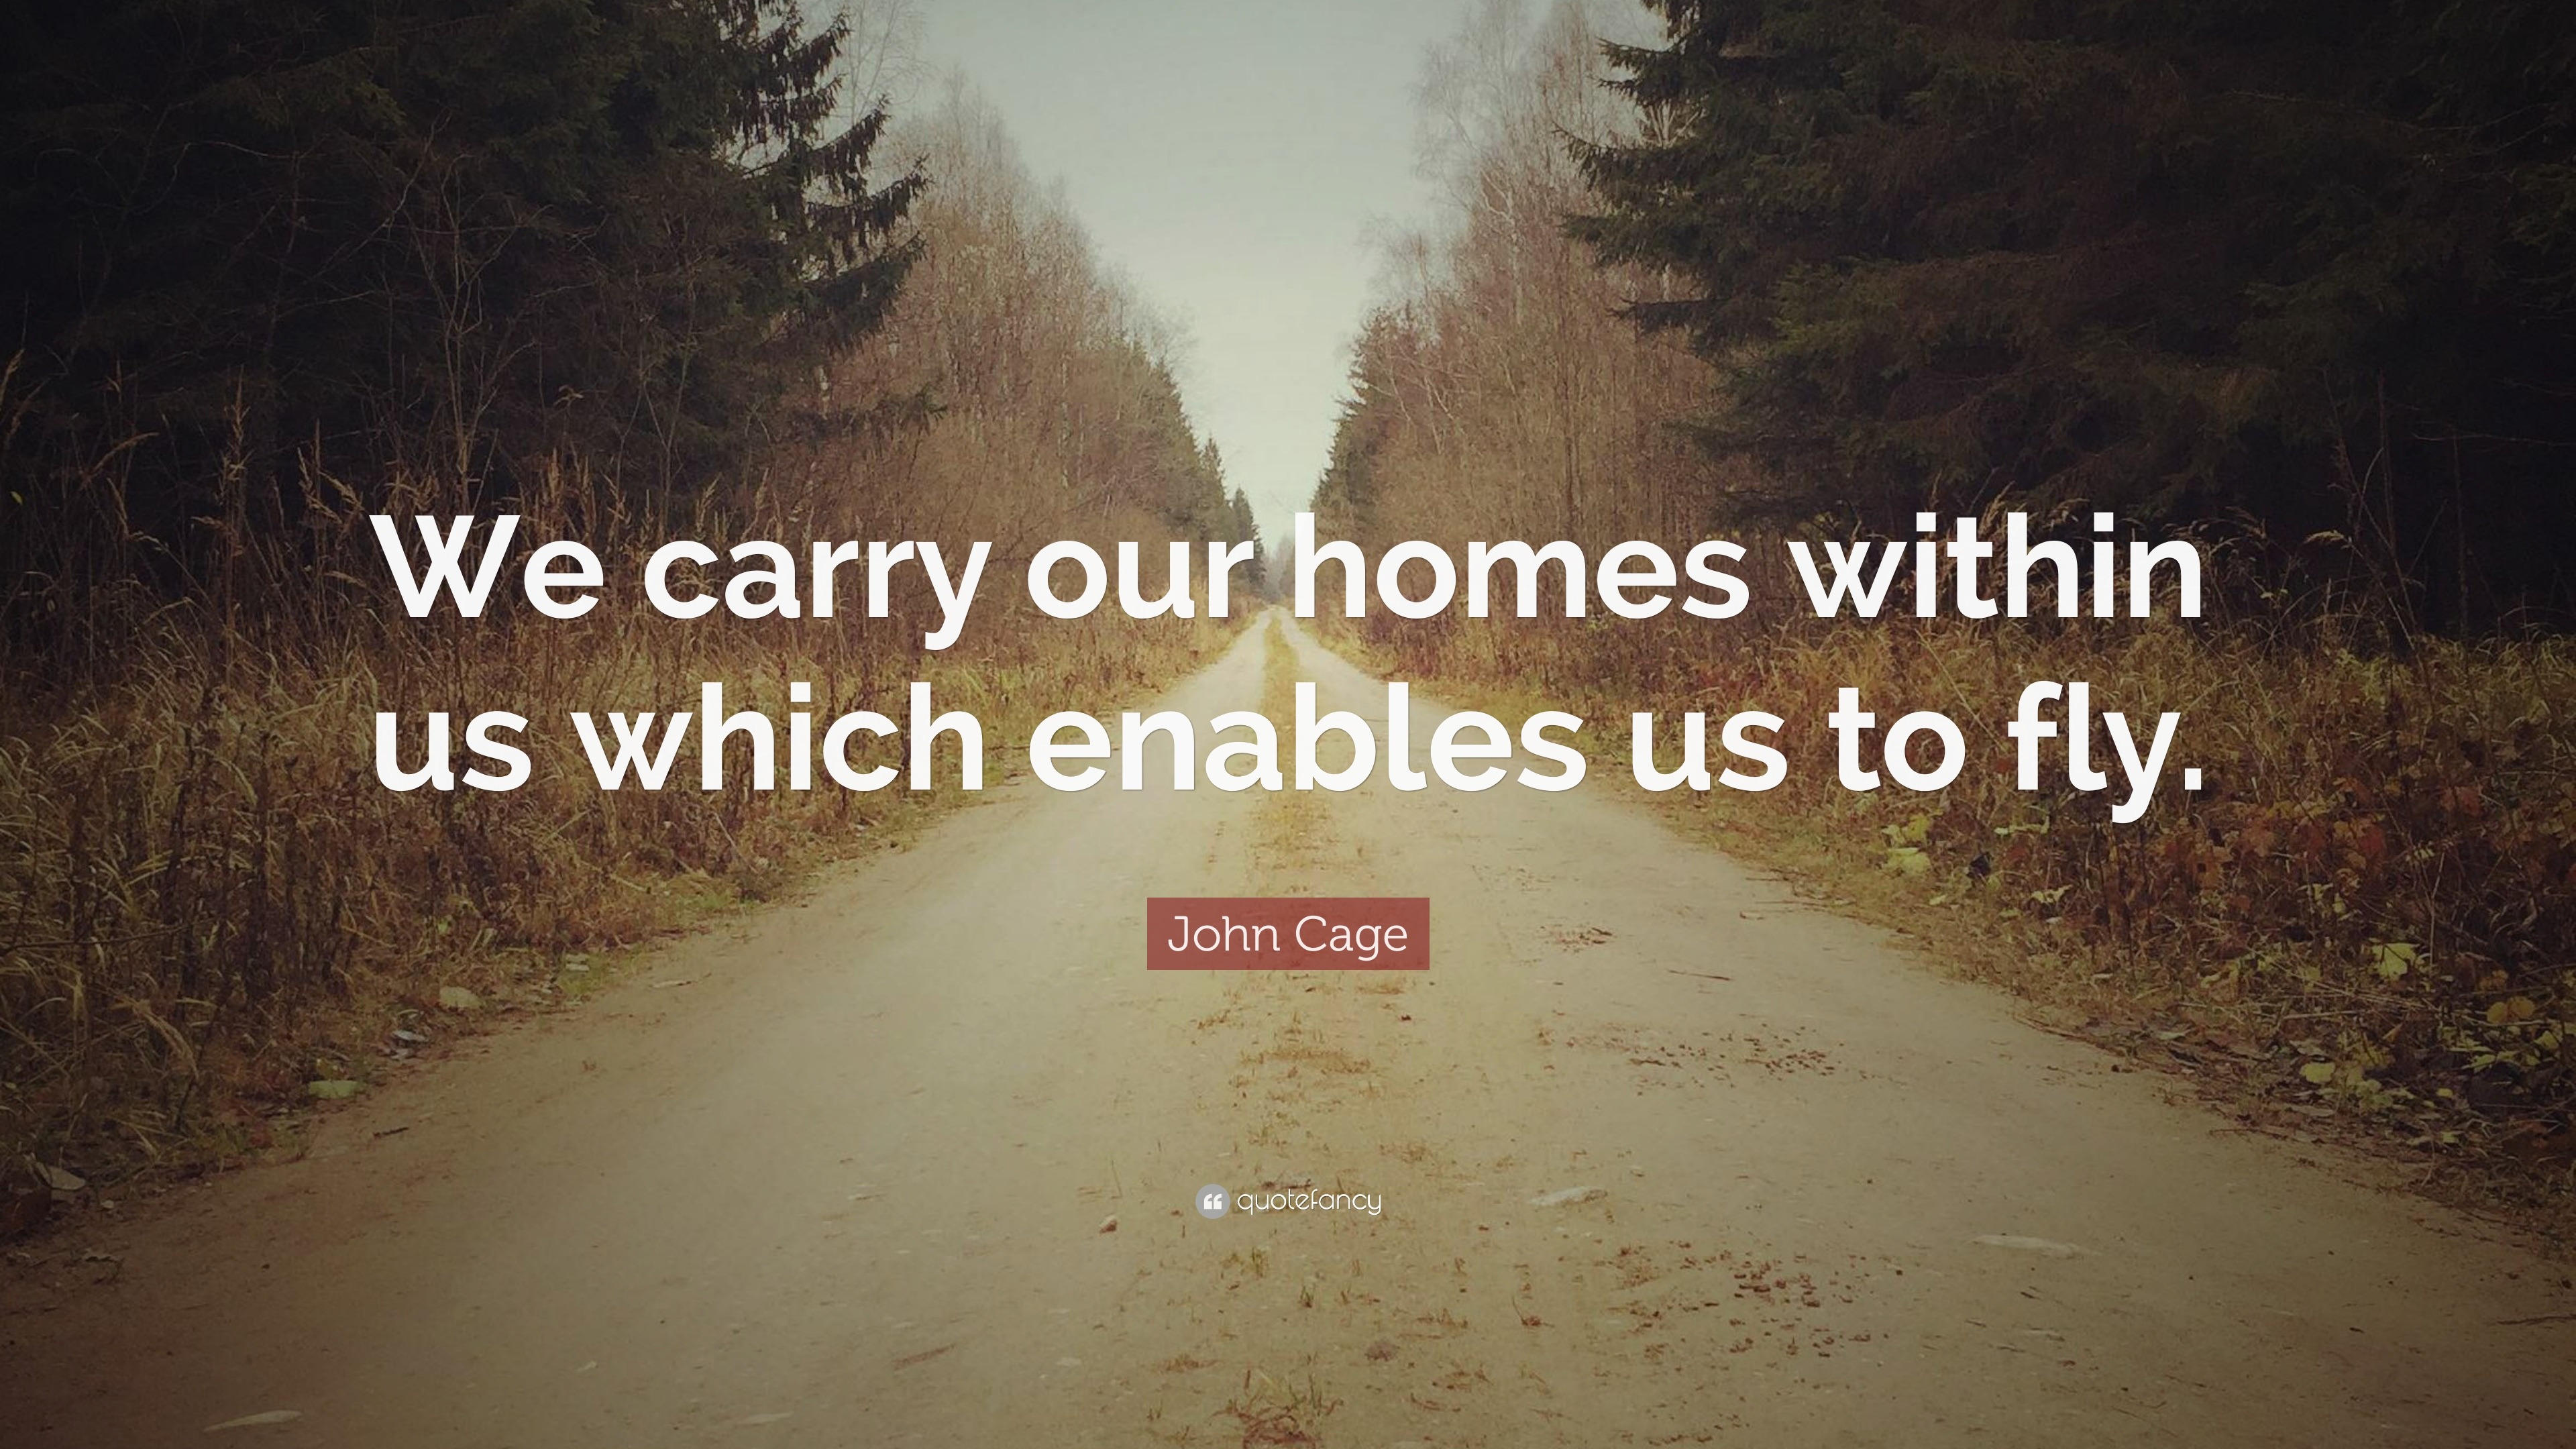 John Cage Quote: “We carry our homes within us which enables us to fly.”
